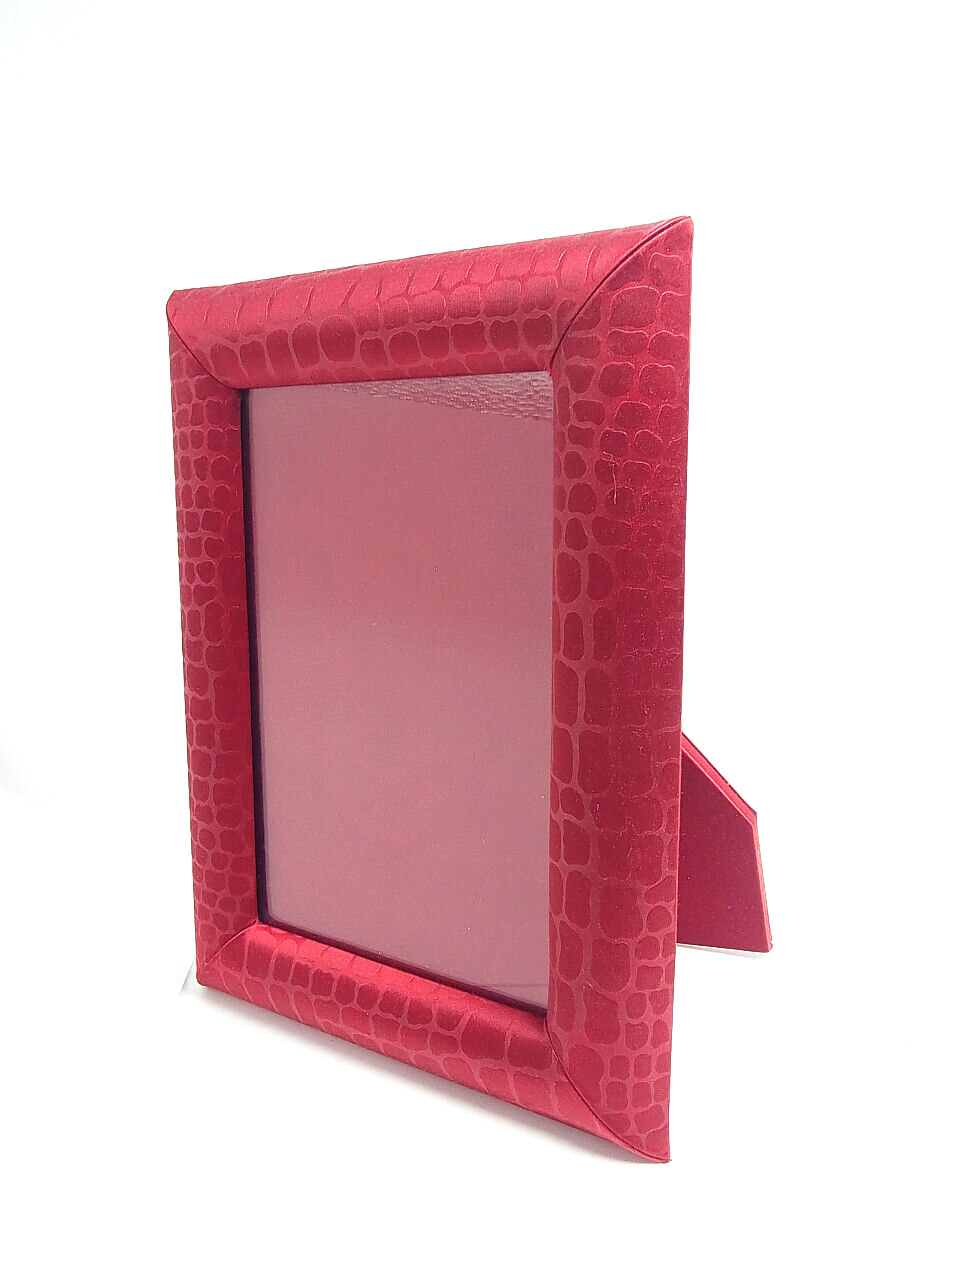 Auth Cartier Photo Picture Frame Crocodile pattern Red 10 x 7.5\